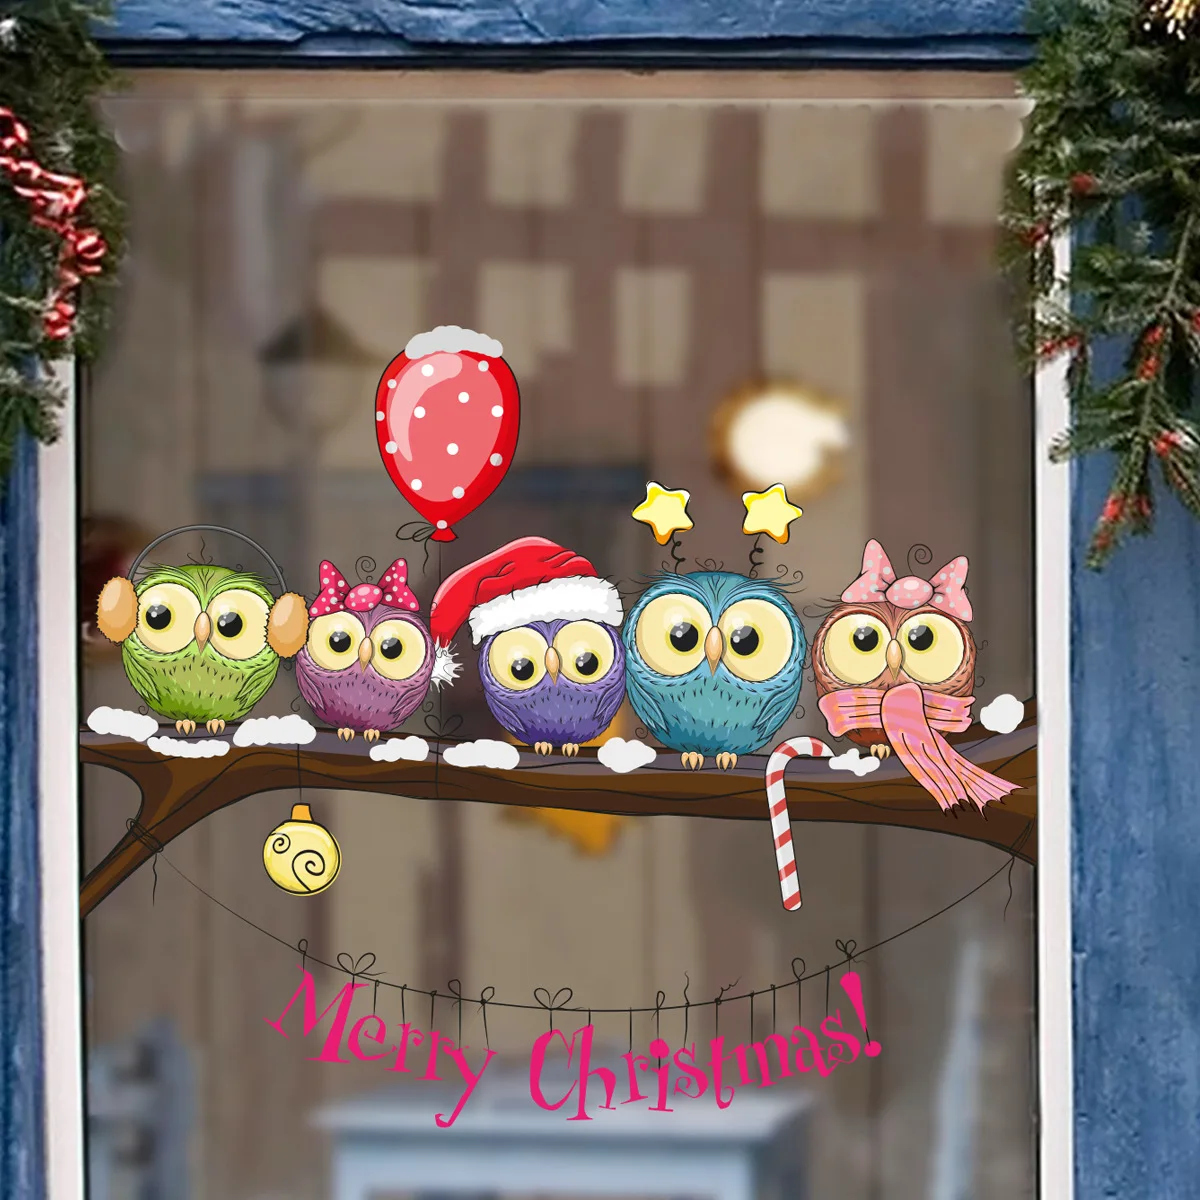 

Merry Christmas Window Wall Stickers Posters Decals Waterproof Owl New Year Christmas Tree Decorations Home Decor Xmas